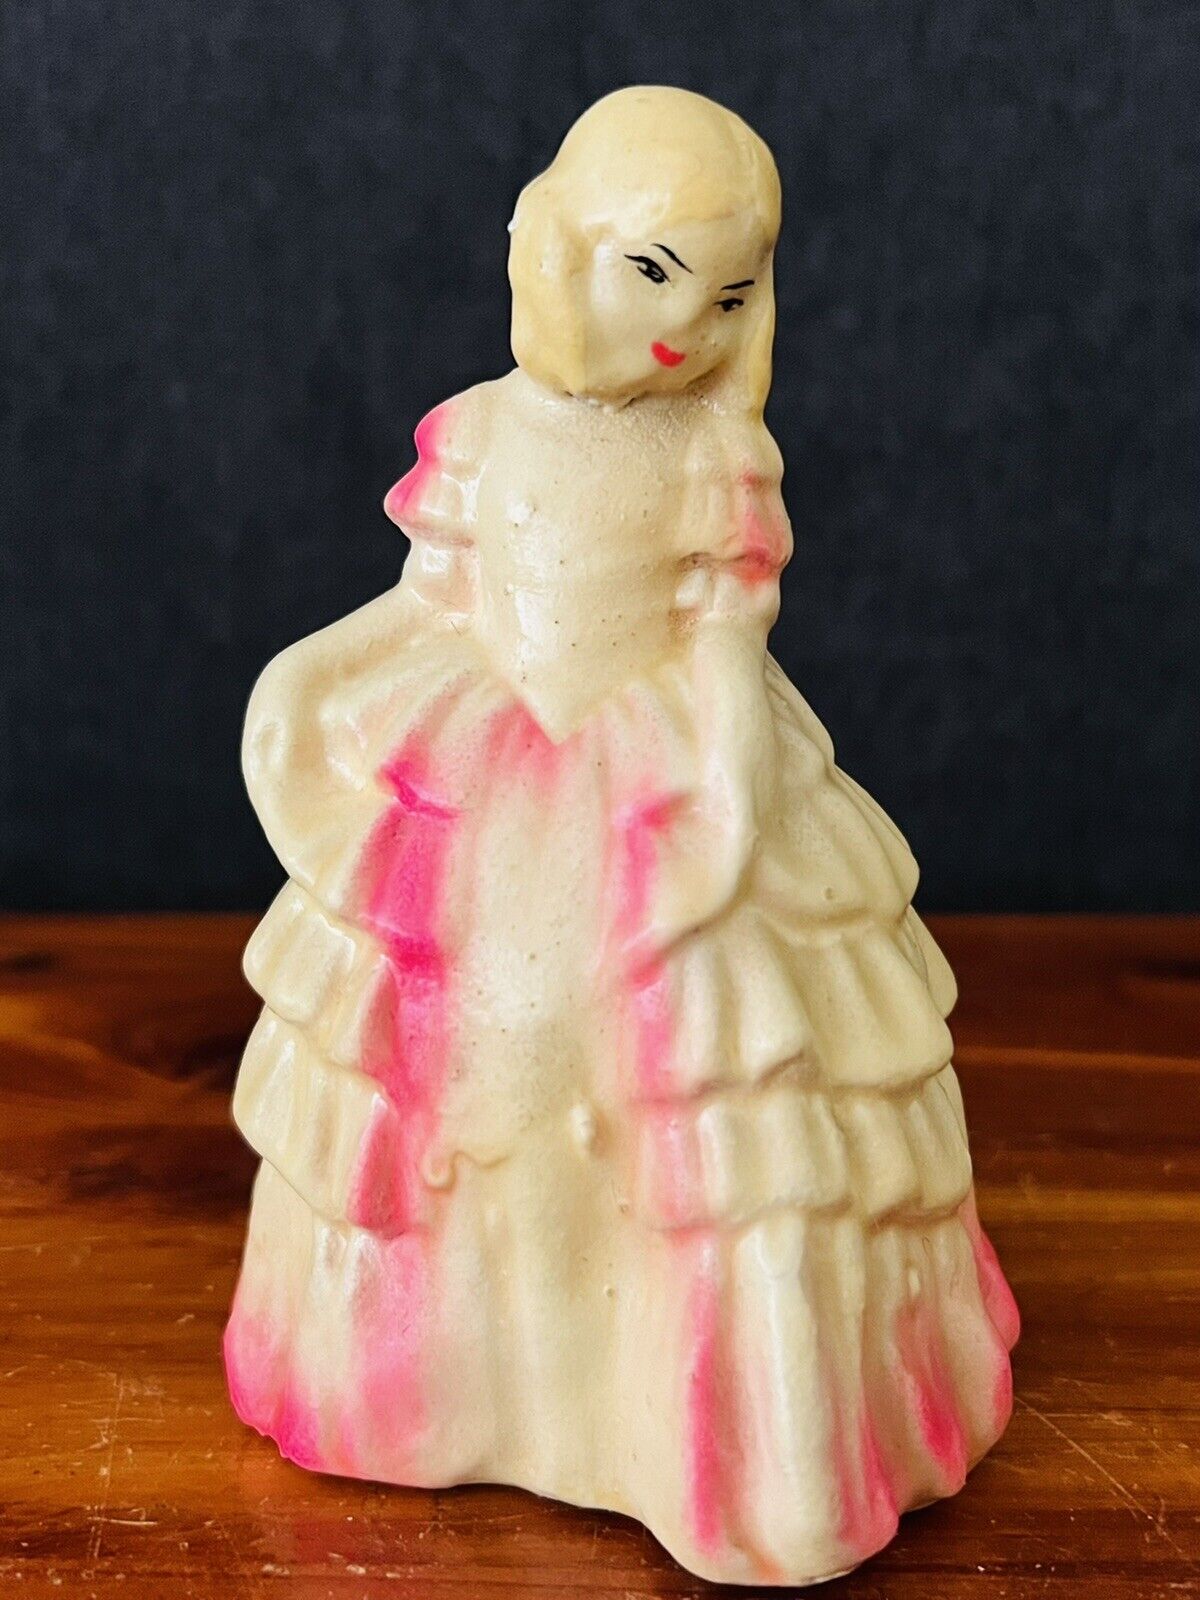 Vintage Chalk Ware Glow Victorian Lady Figurine in Pink Dress Coventry Ware